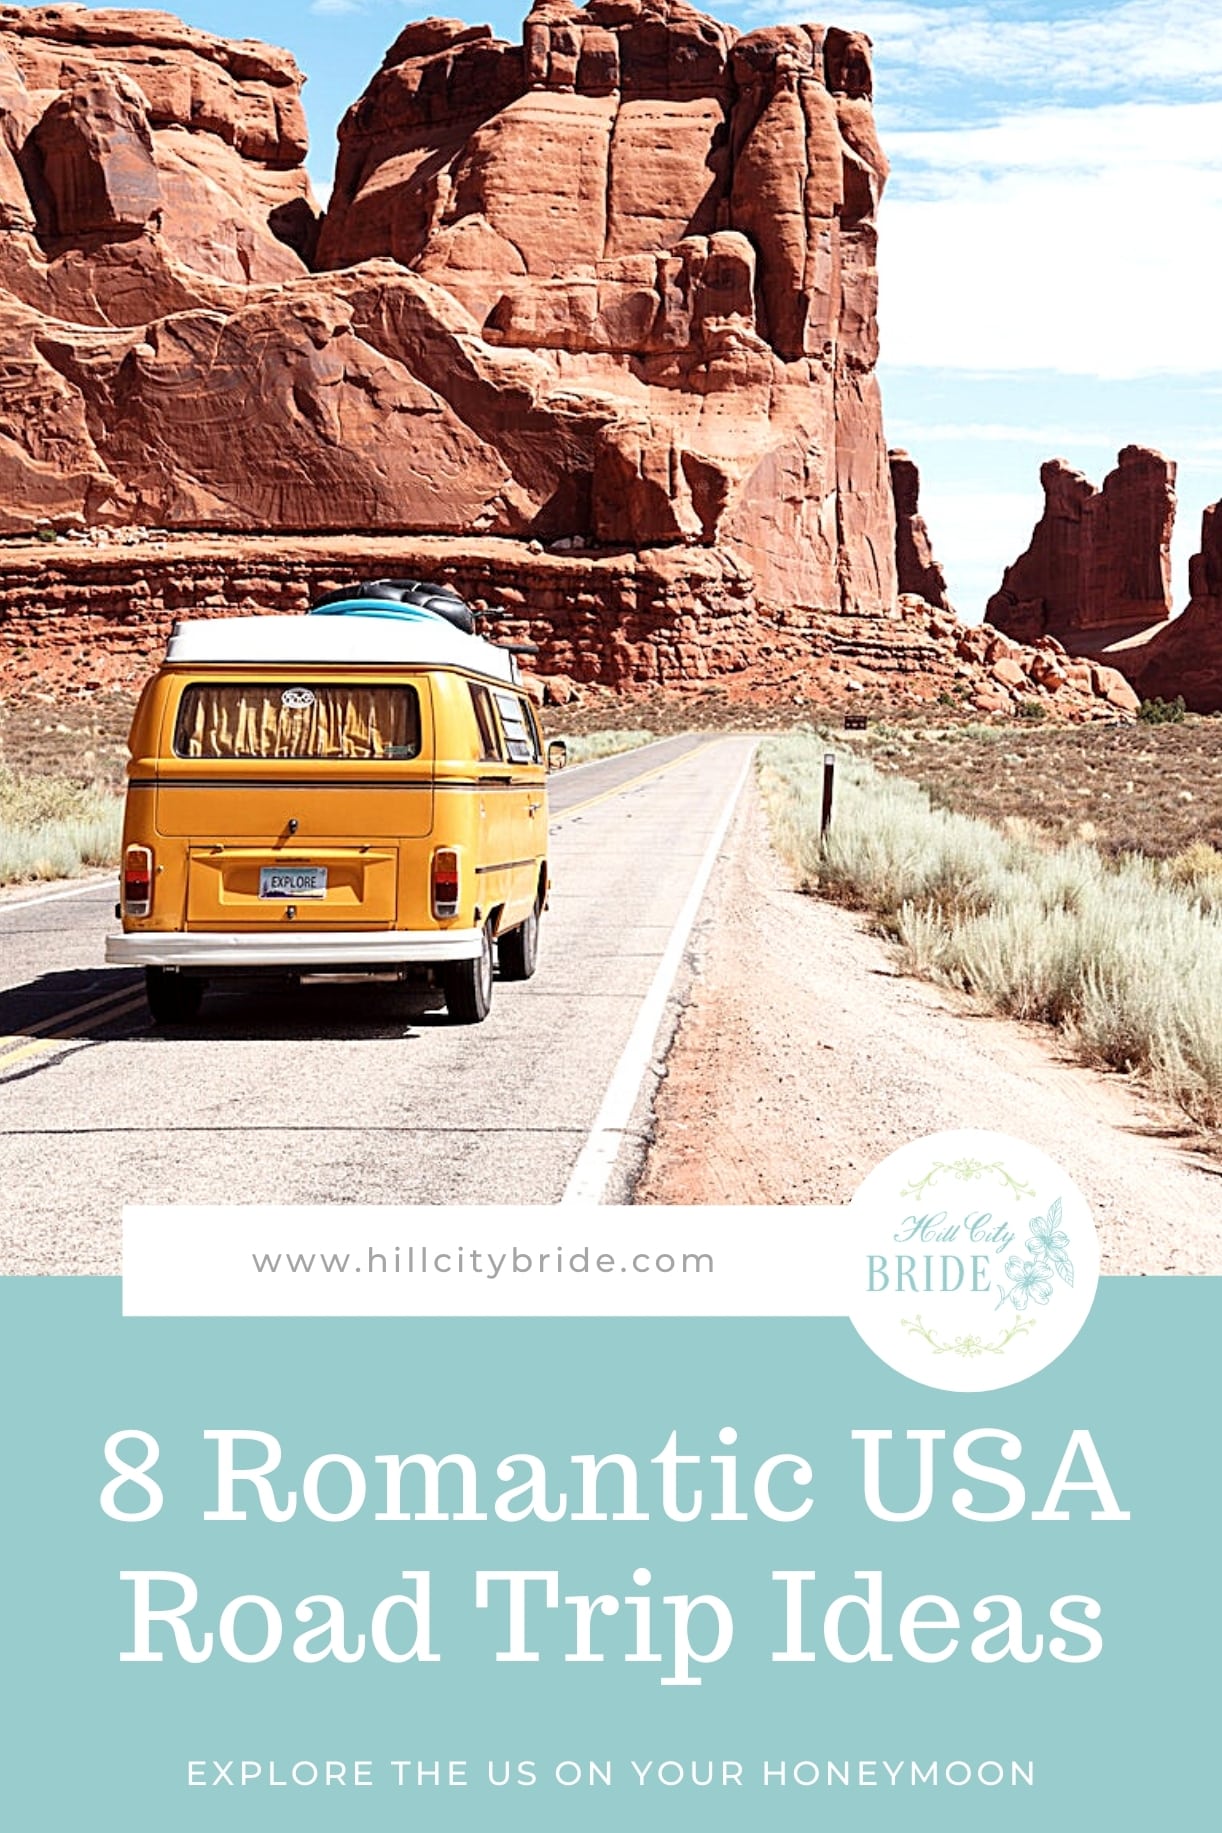 8 of the Best Romantic Road Trip Ideas for Honeymooners in the USA